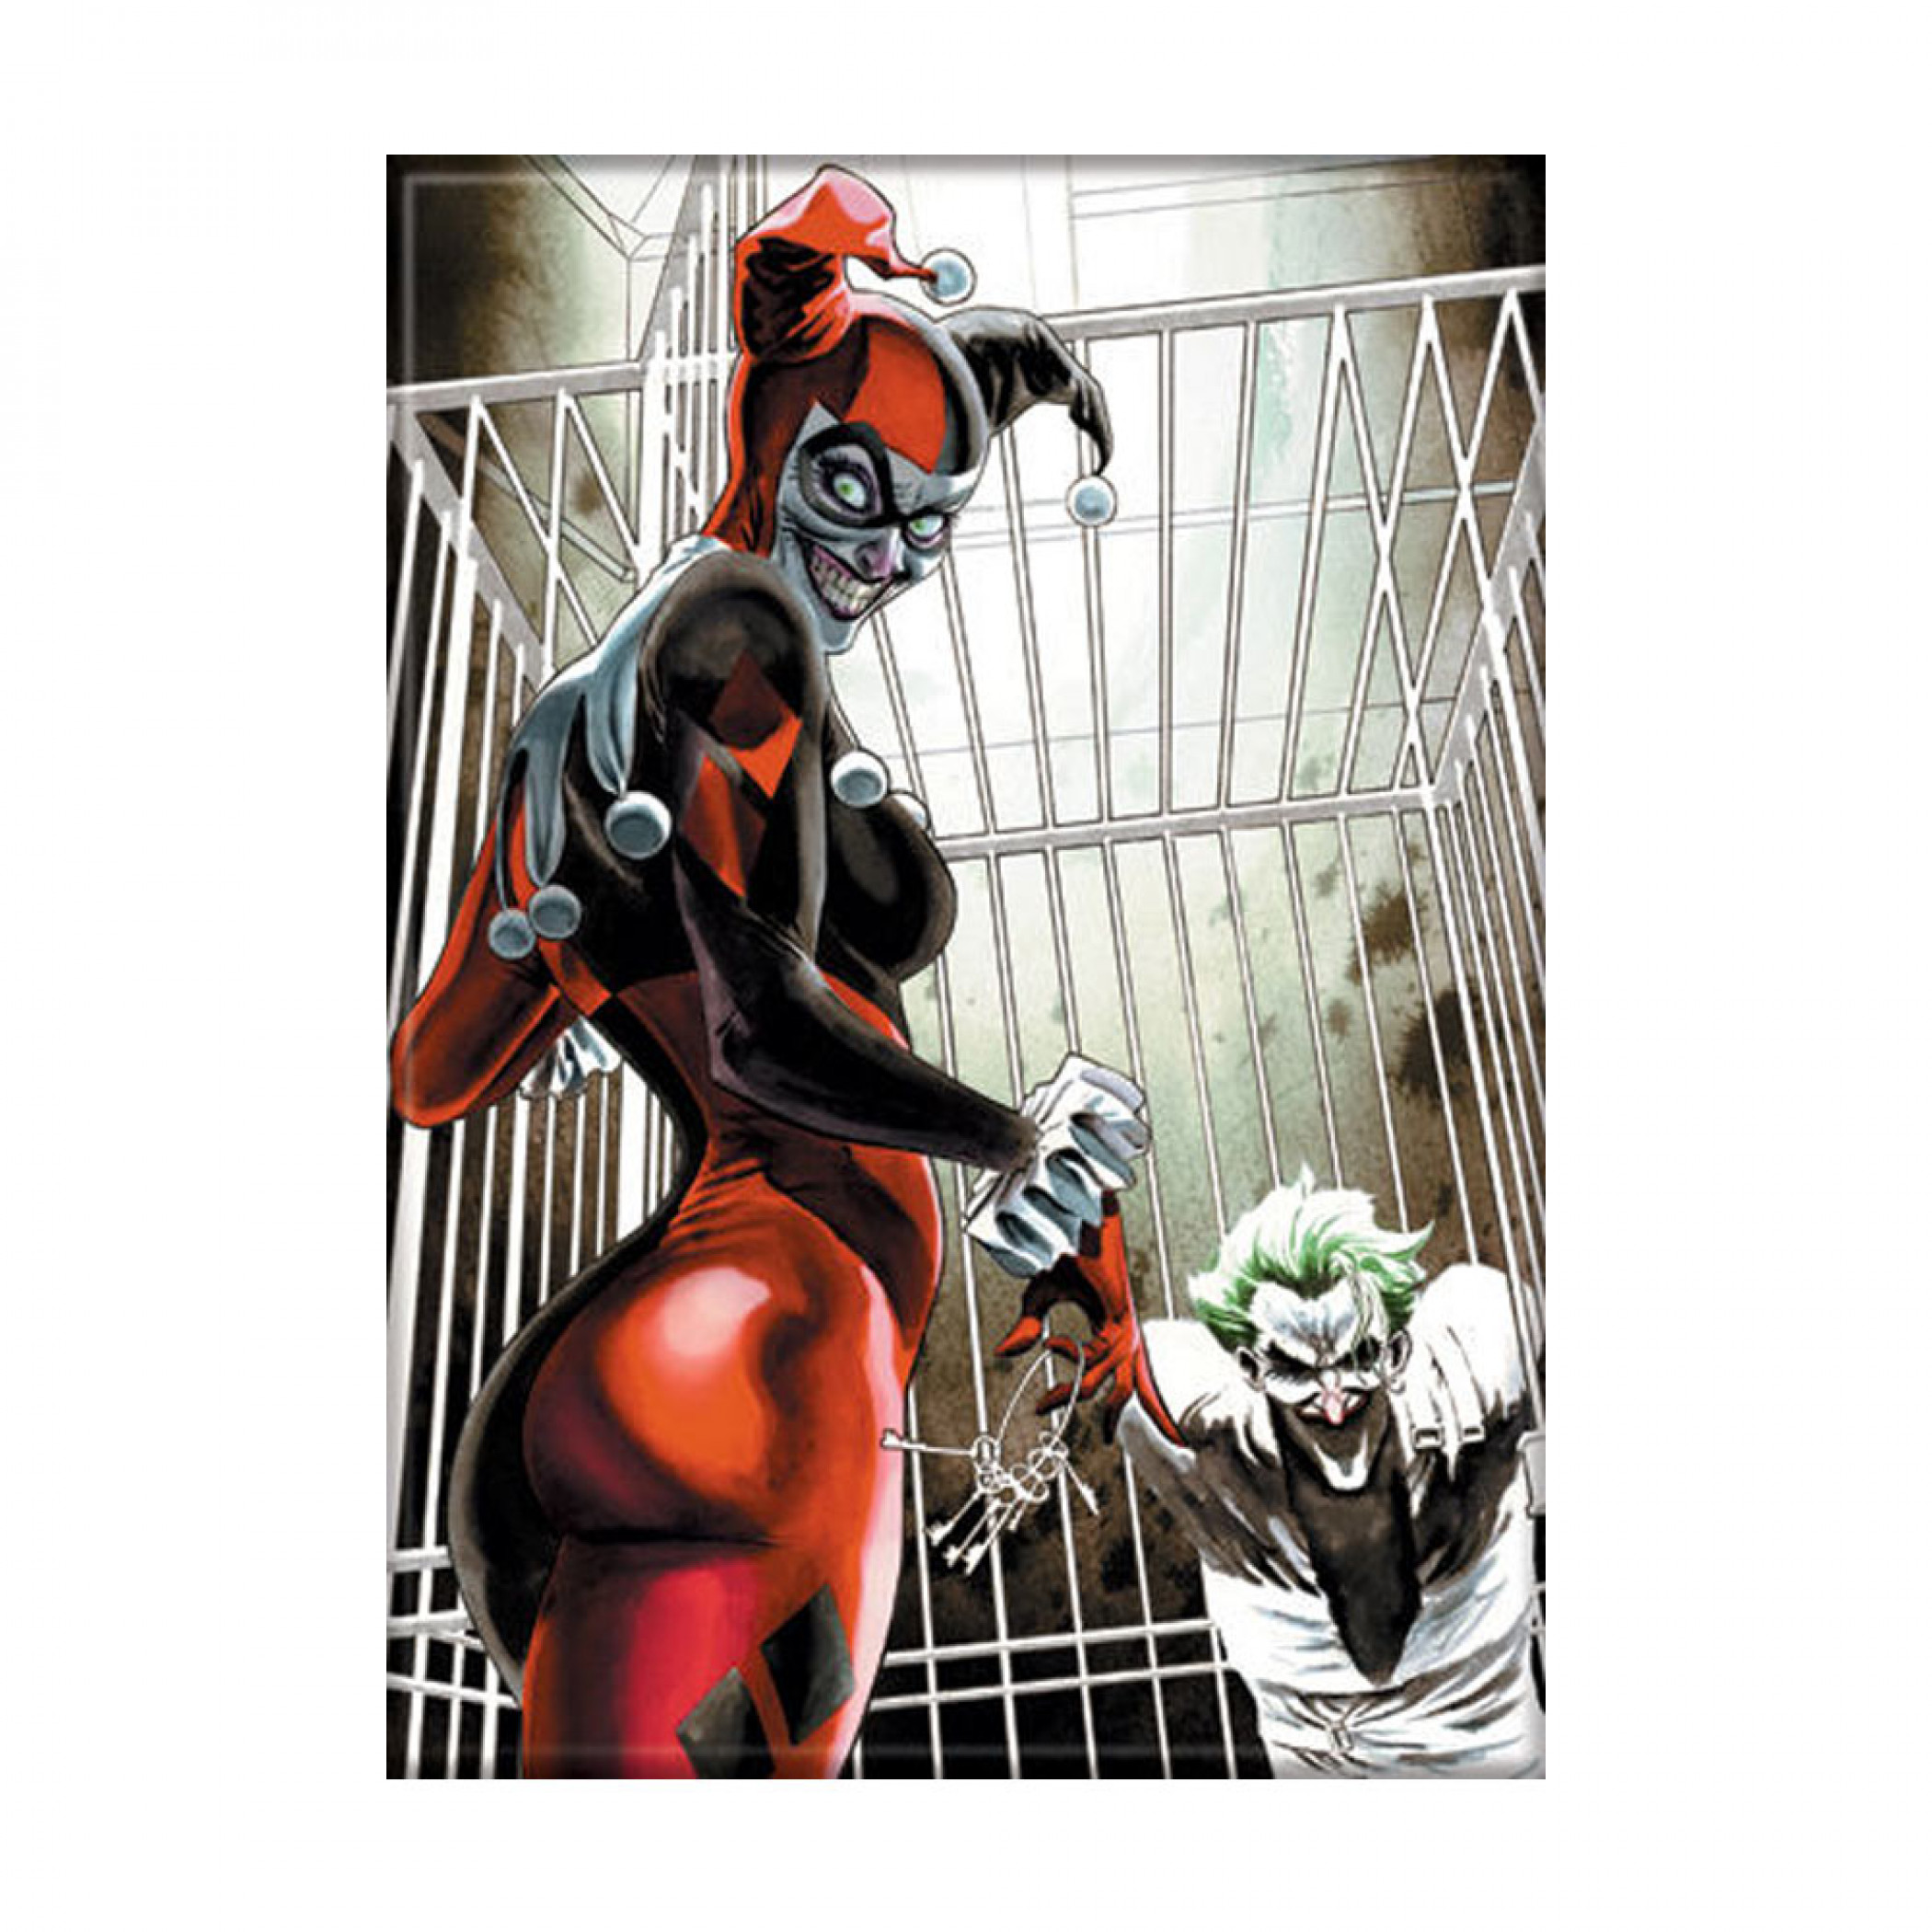 Harley with Joker in Cage Photo Magnet